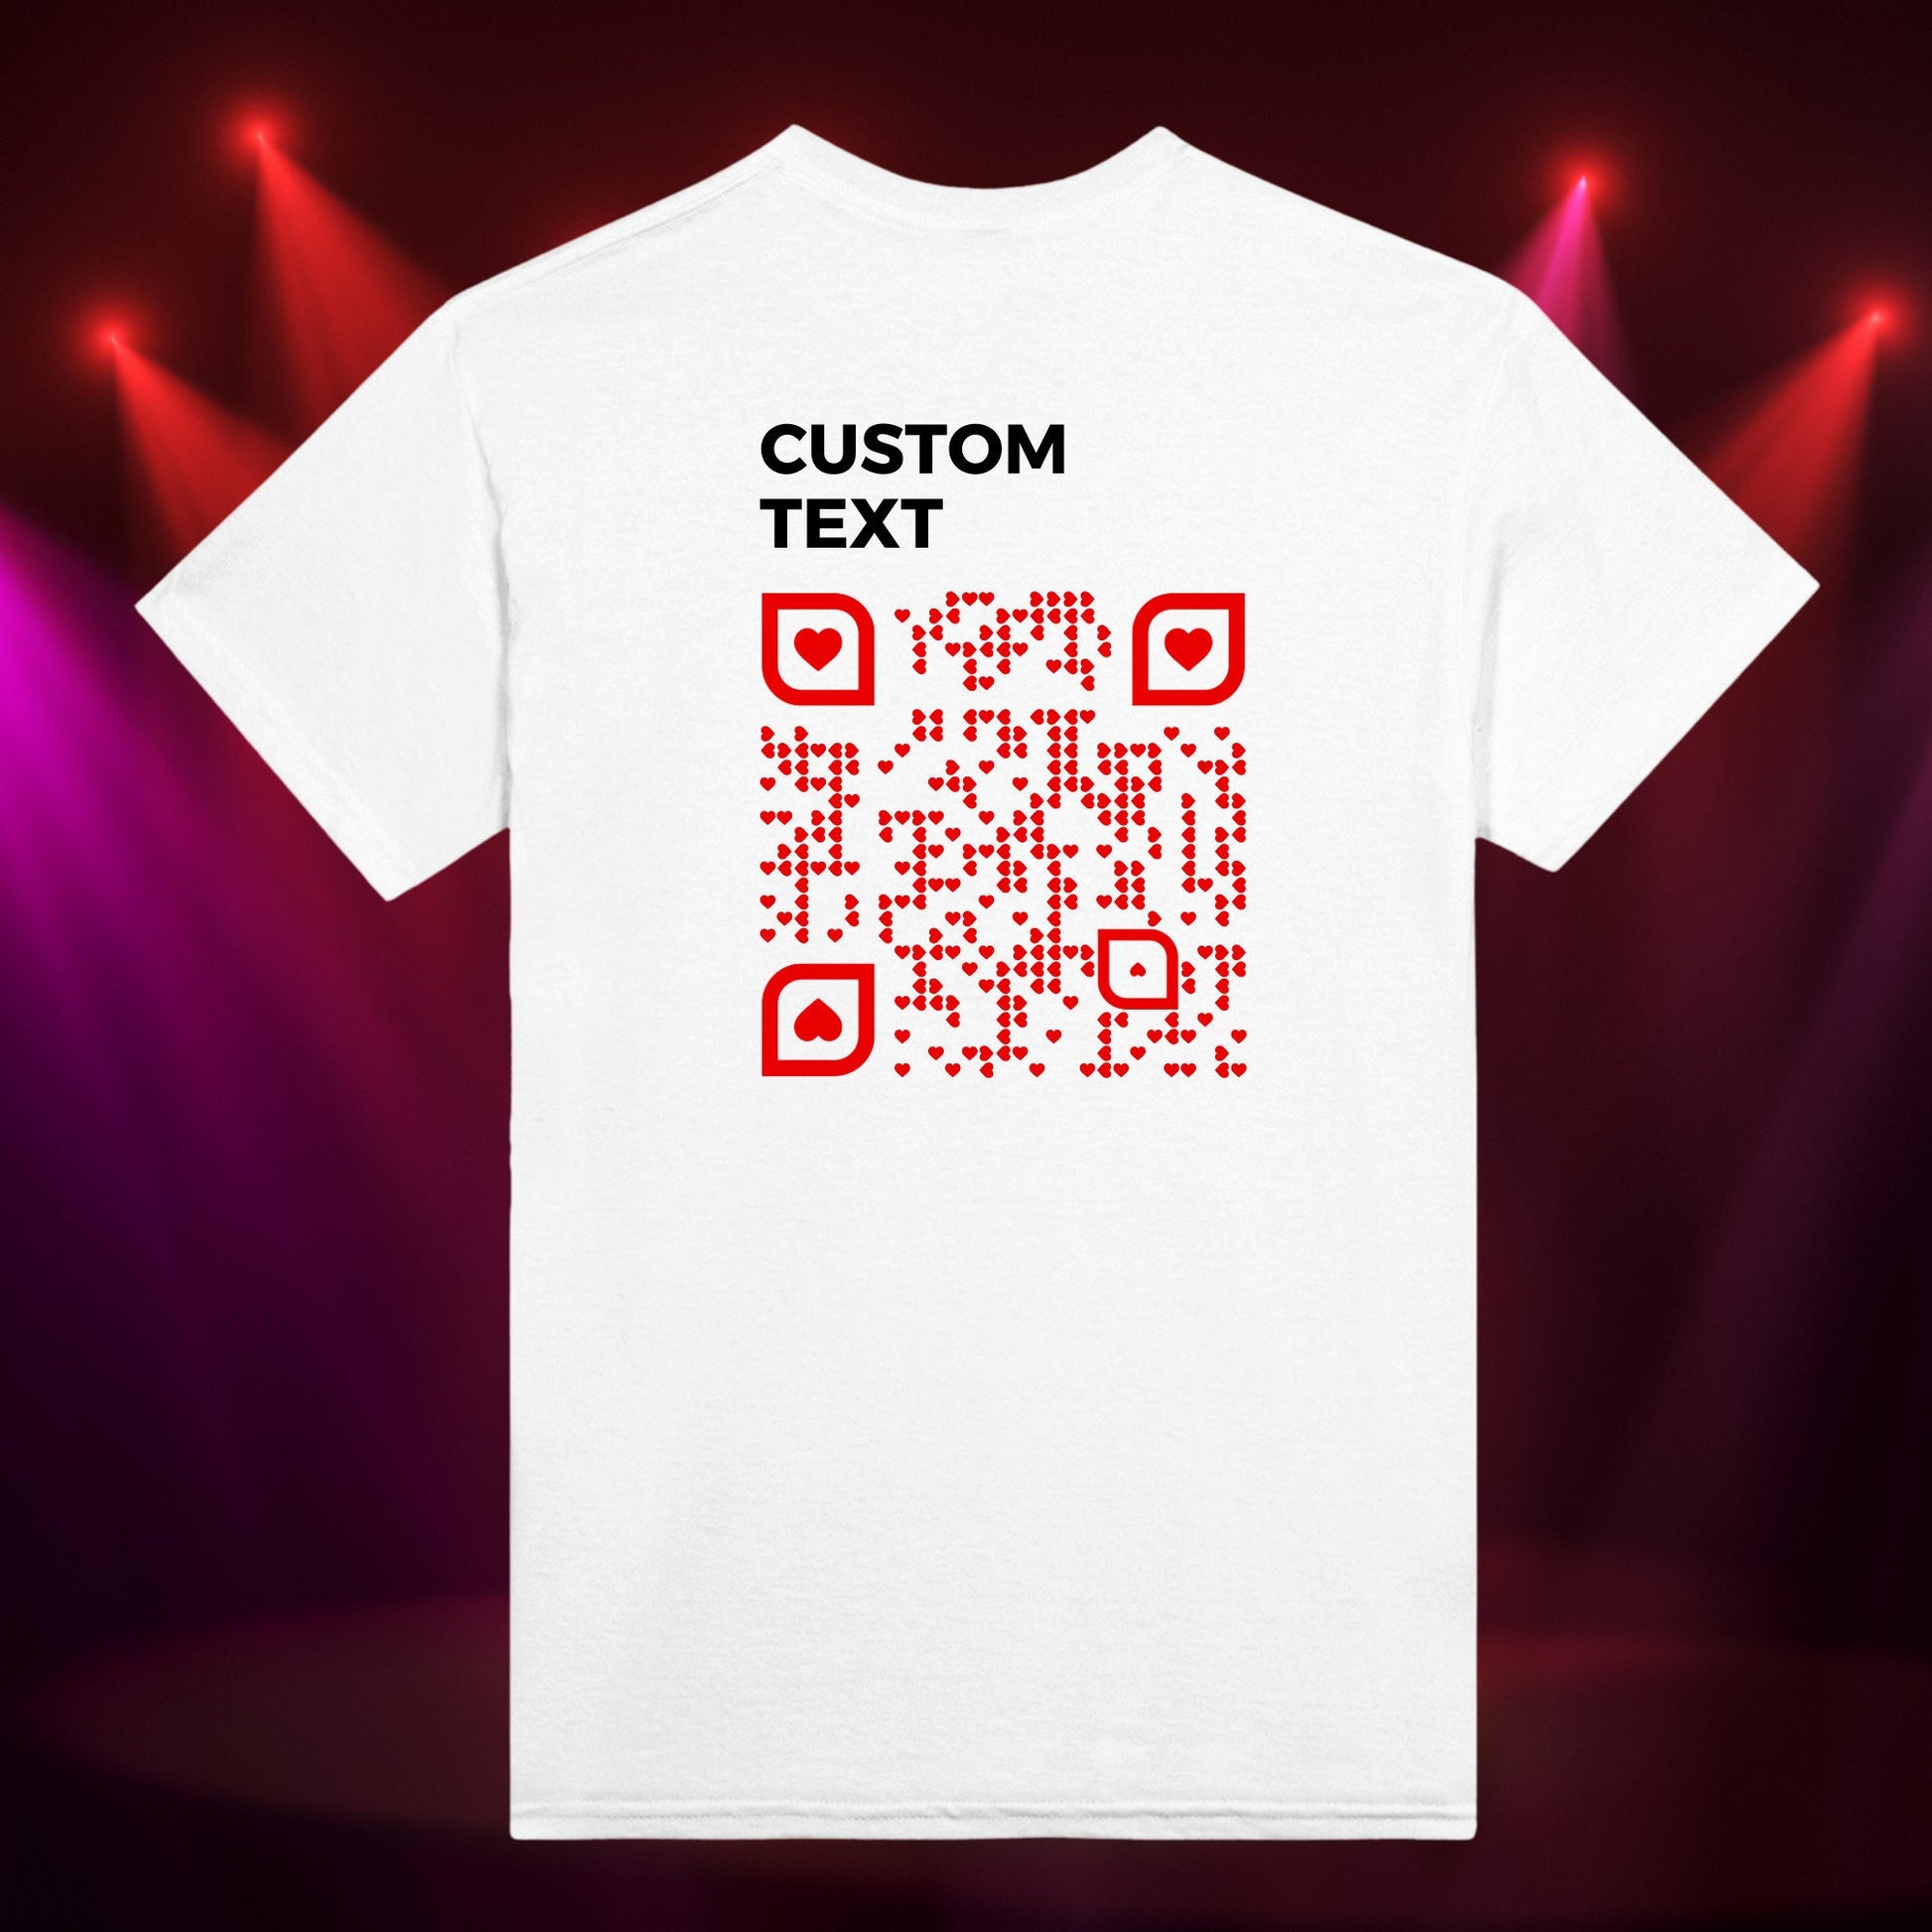 Personalized Custom Text QR Code T-Shirt, Wanna Date Me QR Code Tee, Custom Business QR Shirts, Funny Gift for Singles, Wanna Marry Me Tee